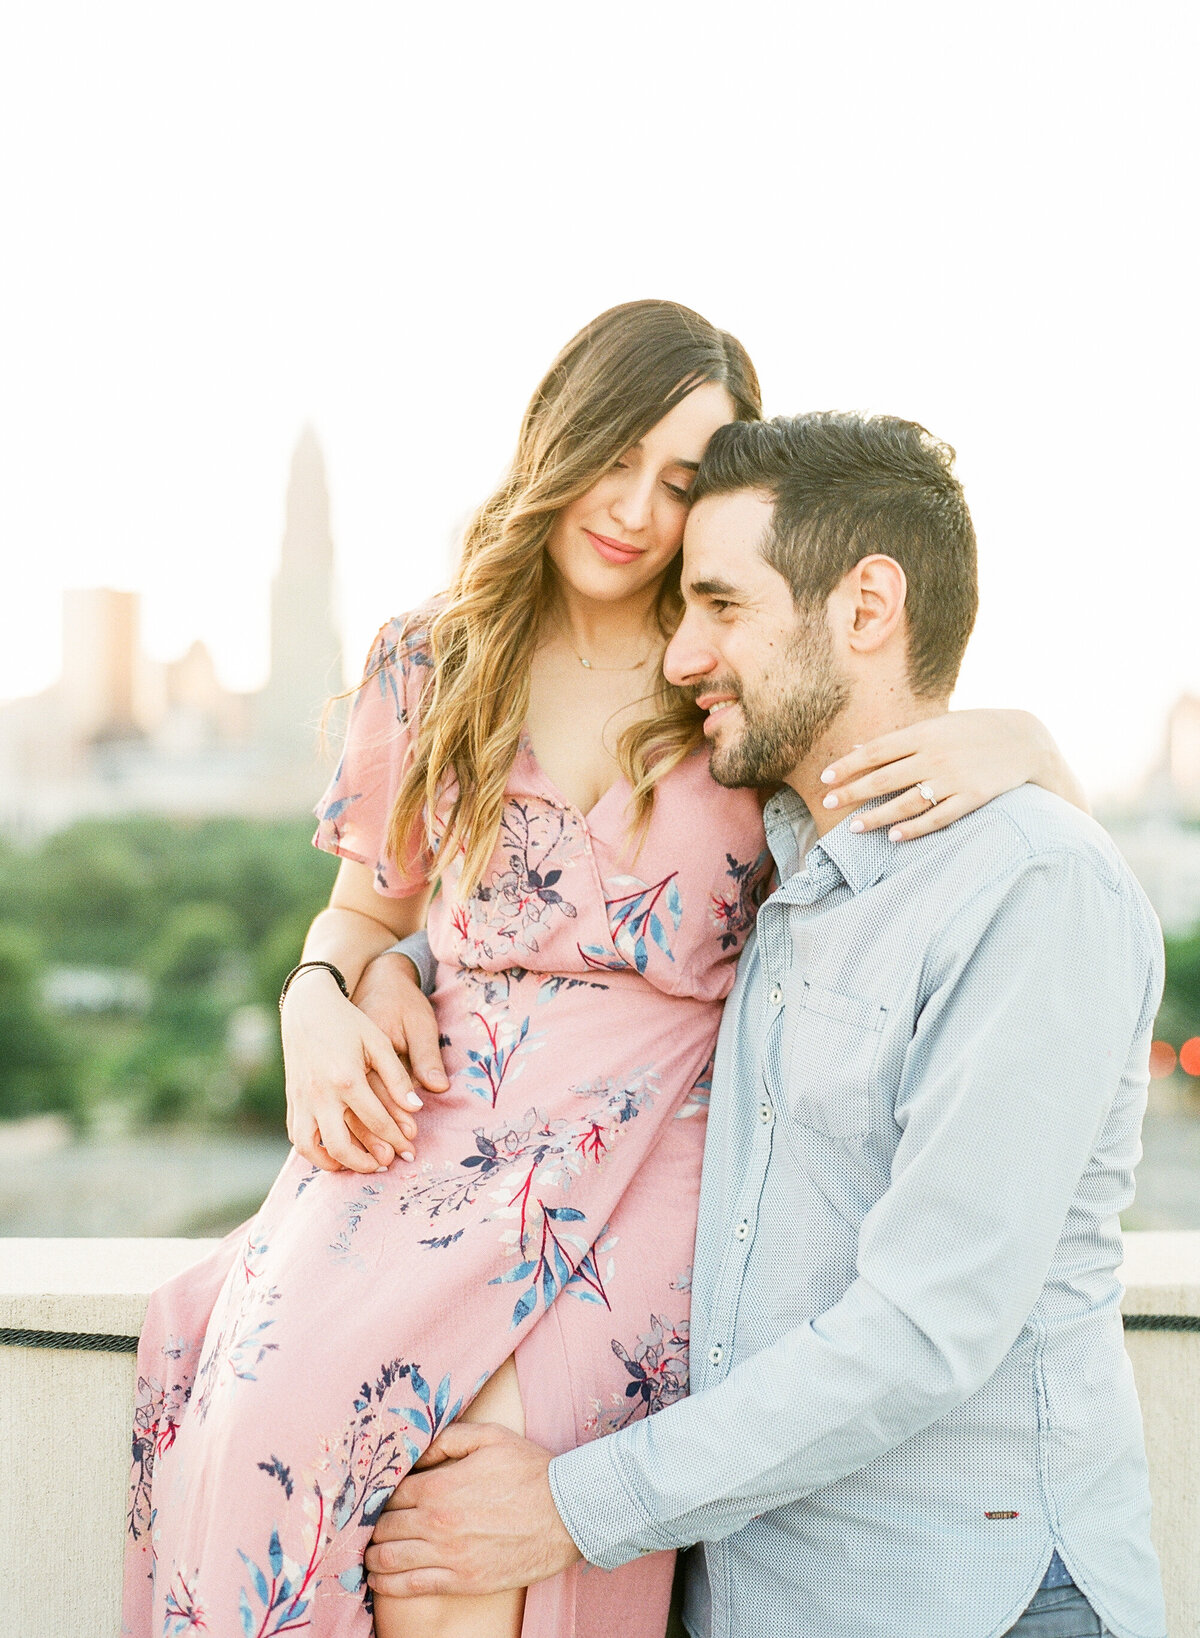 uptown-charlotte-engagement-session-096